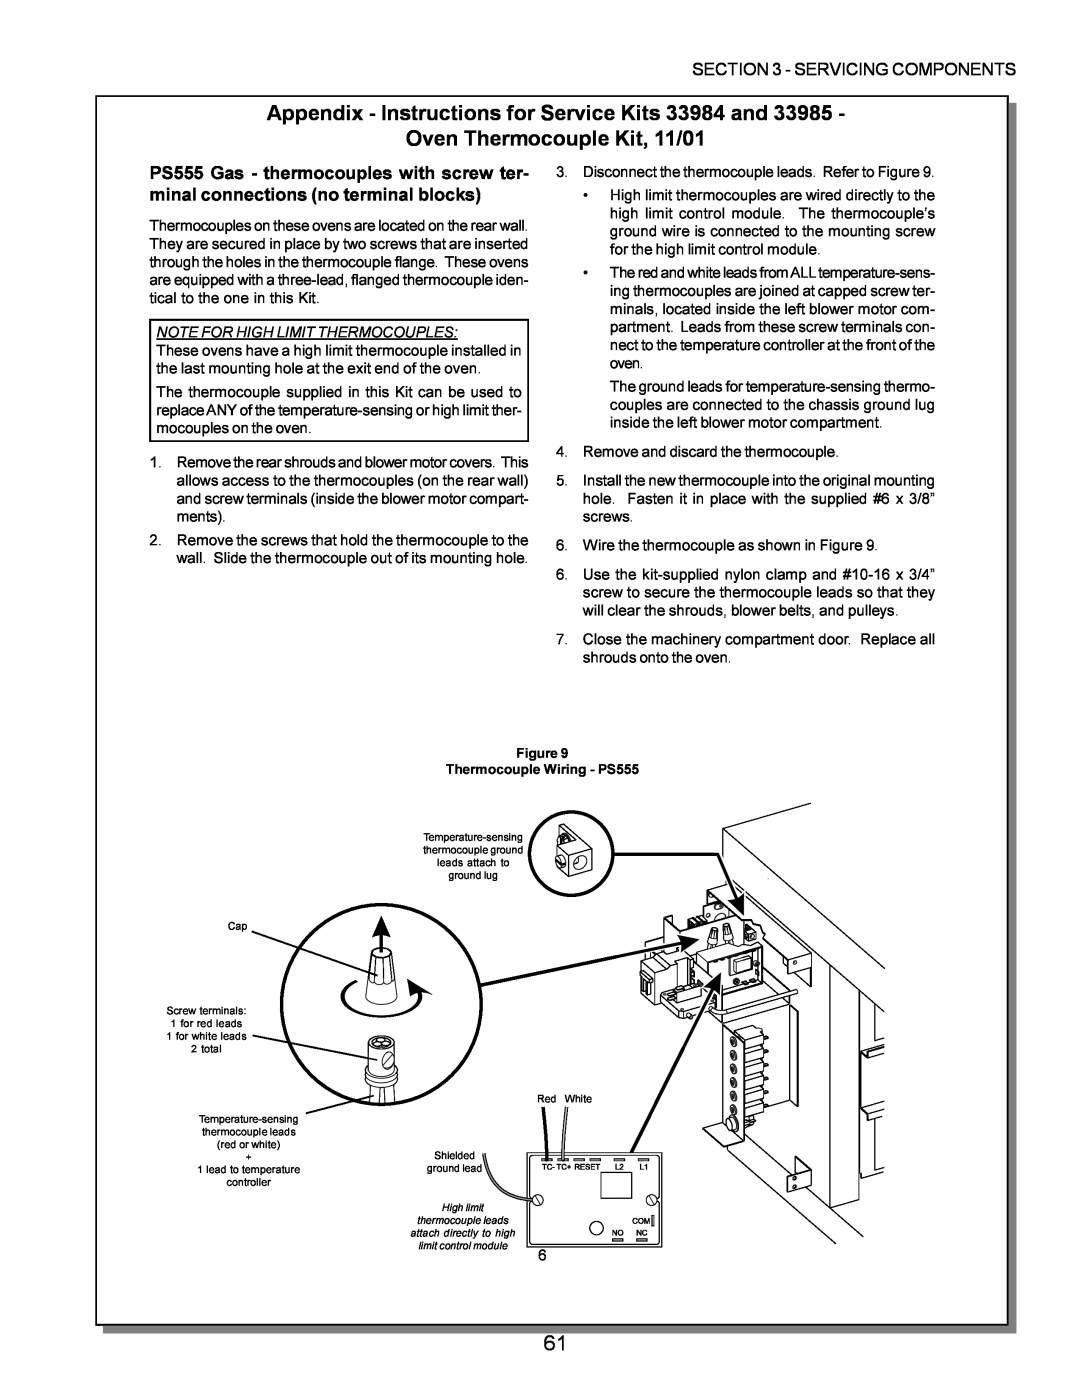 Middleby Marshall PS200, PS570, PS360 manual Appendix - Instructions for Service Kits 33984 and, Oven Thermocouple Kit, 11/01 